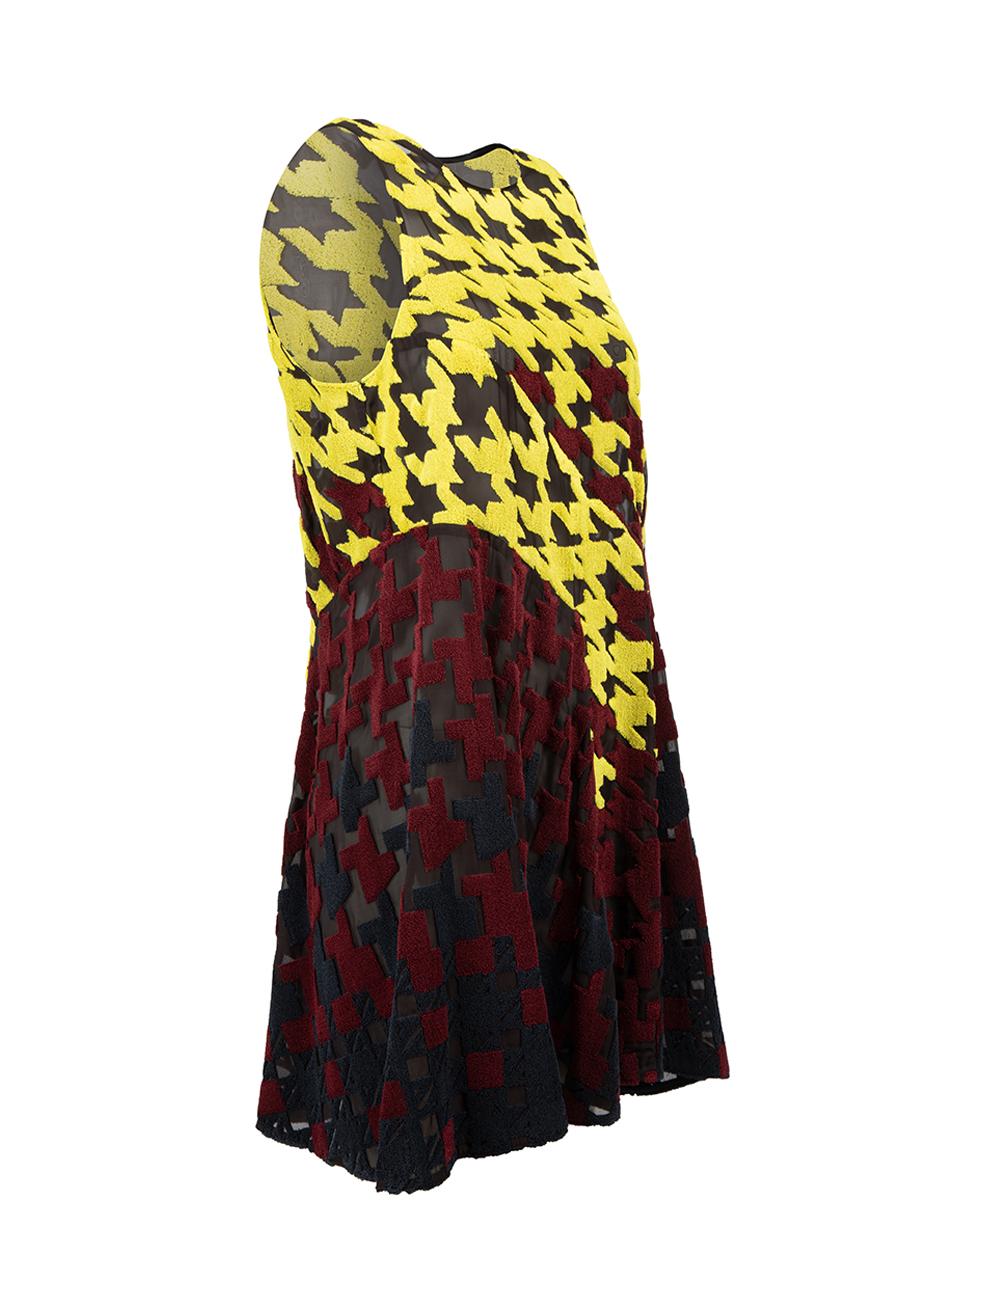 CONDITION is Very good. Minimal wear to dress is evident. Minimal wear to the left-side and rear with pulls to the weave on this used Mary Katrantzou designer resale item.



Details


Multicolour

Silk

Round